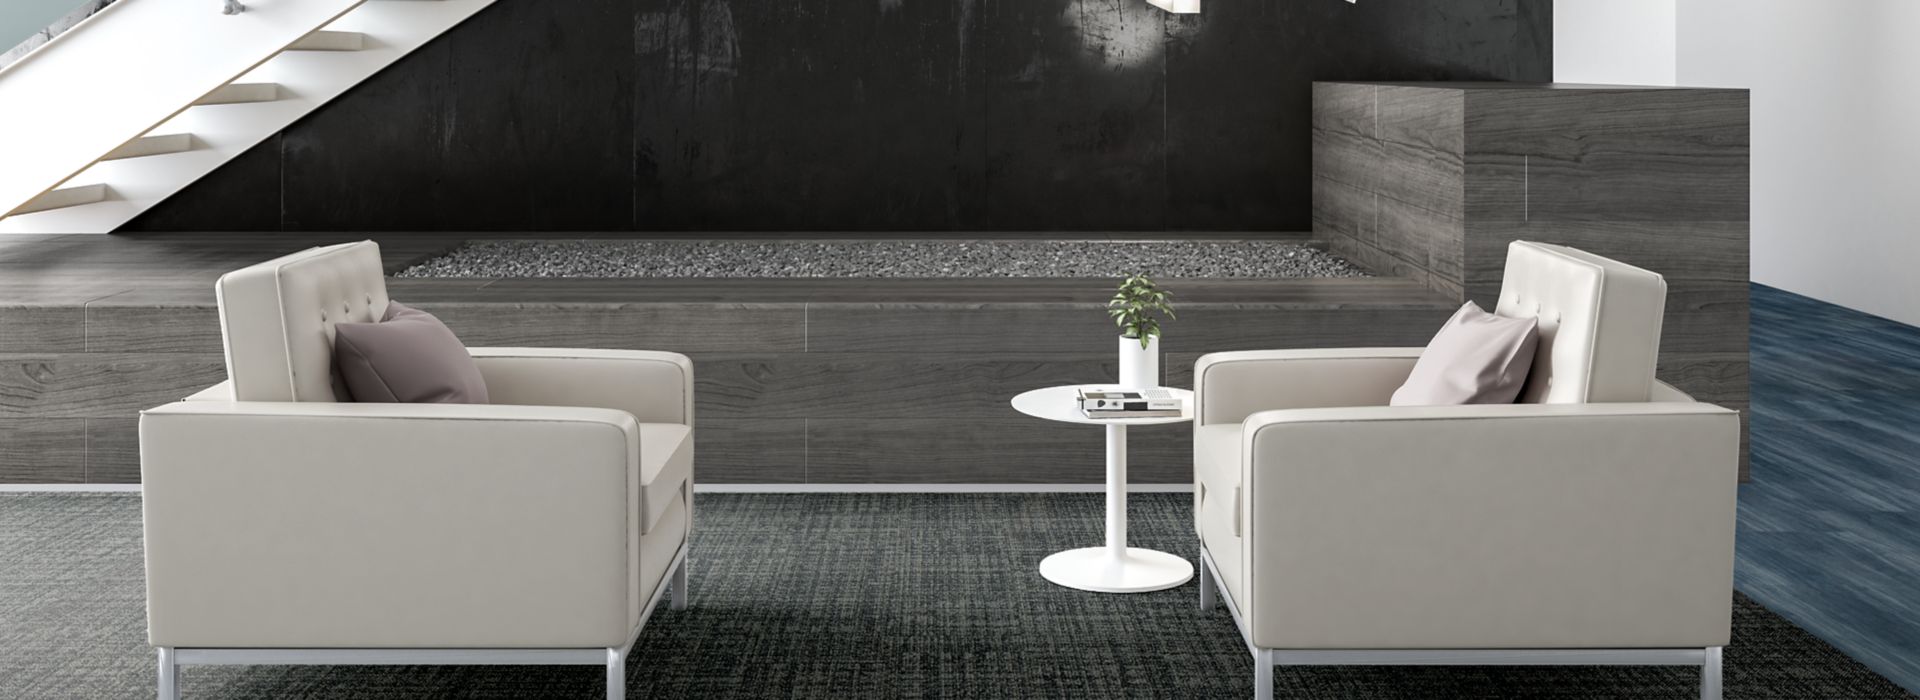 Interface Source Material plank carpet tile and Studio Set plank LVT in lobby with two white chairs and stairs numéro d’image 1